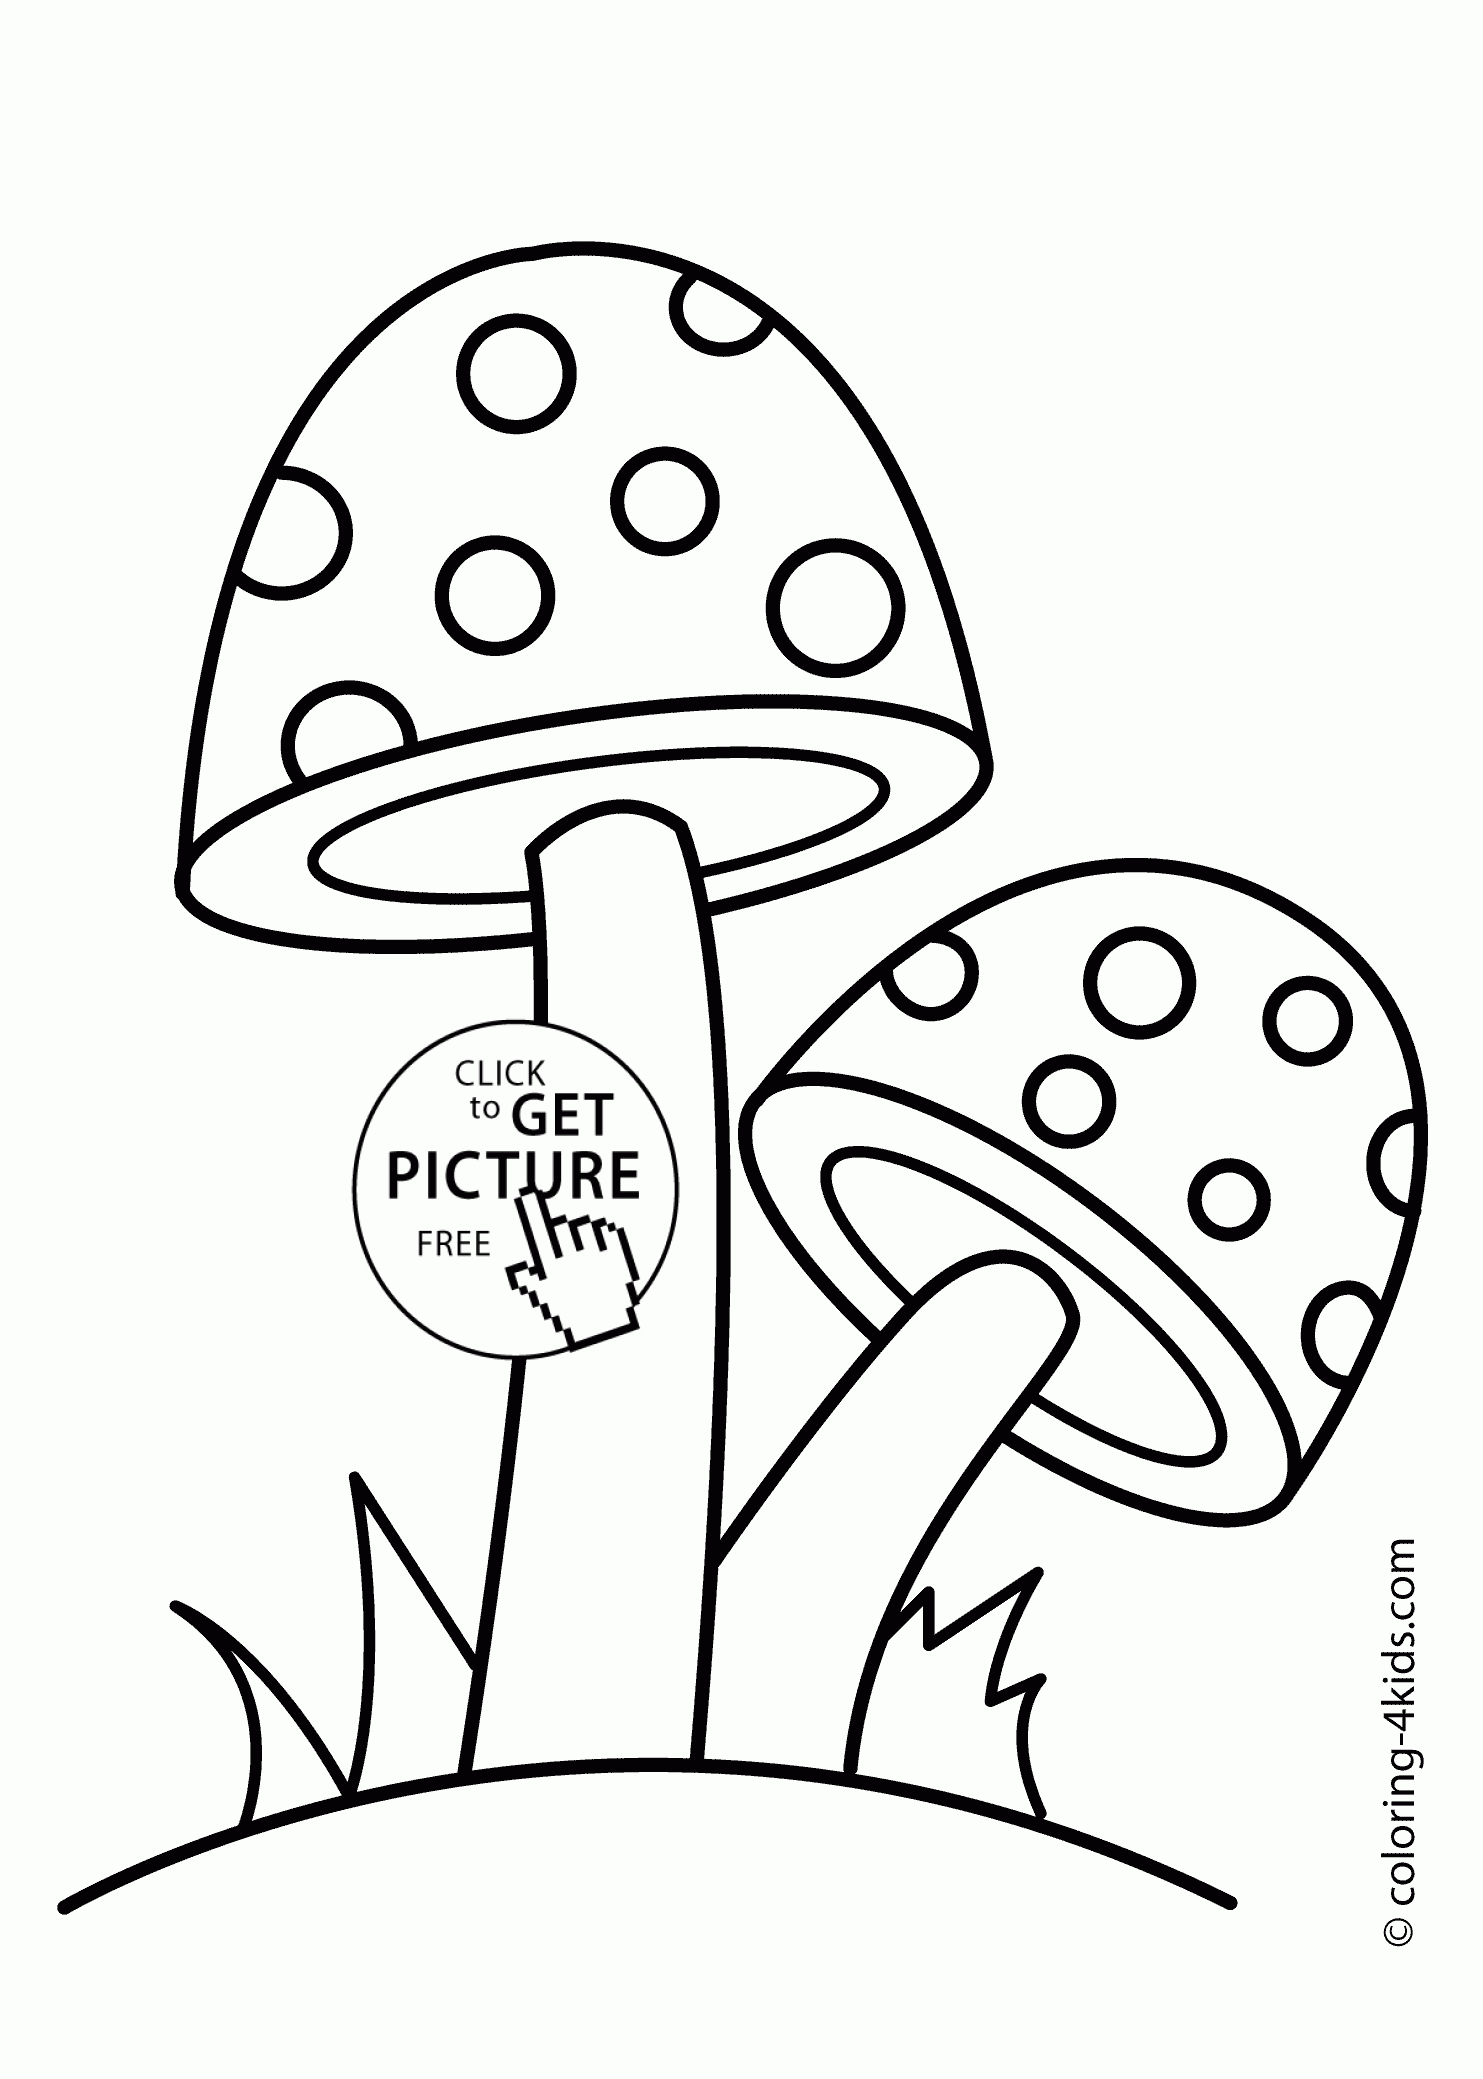 Psychedelic Mushrooms Coloring Page Free Printable Coloring Pages